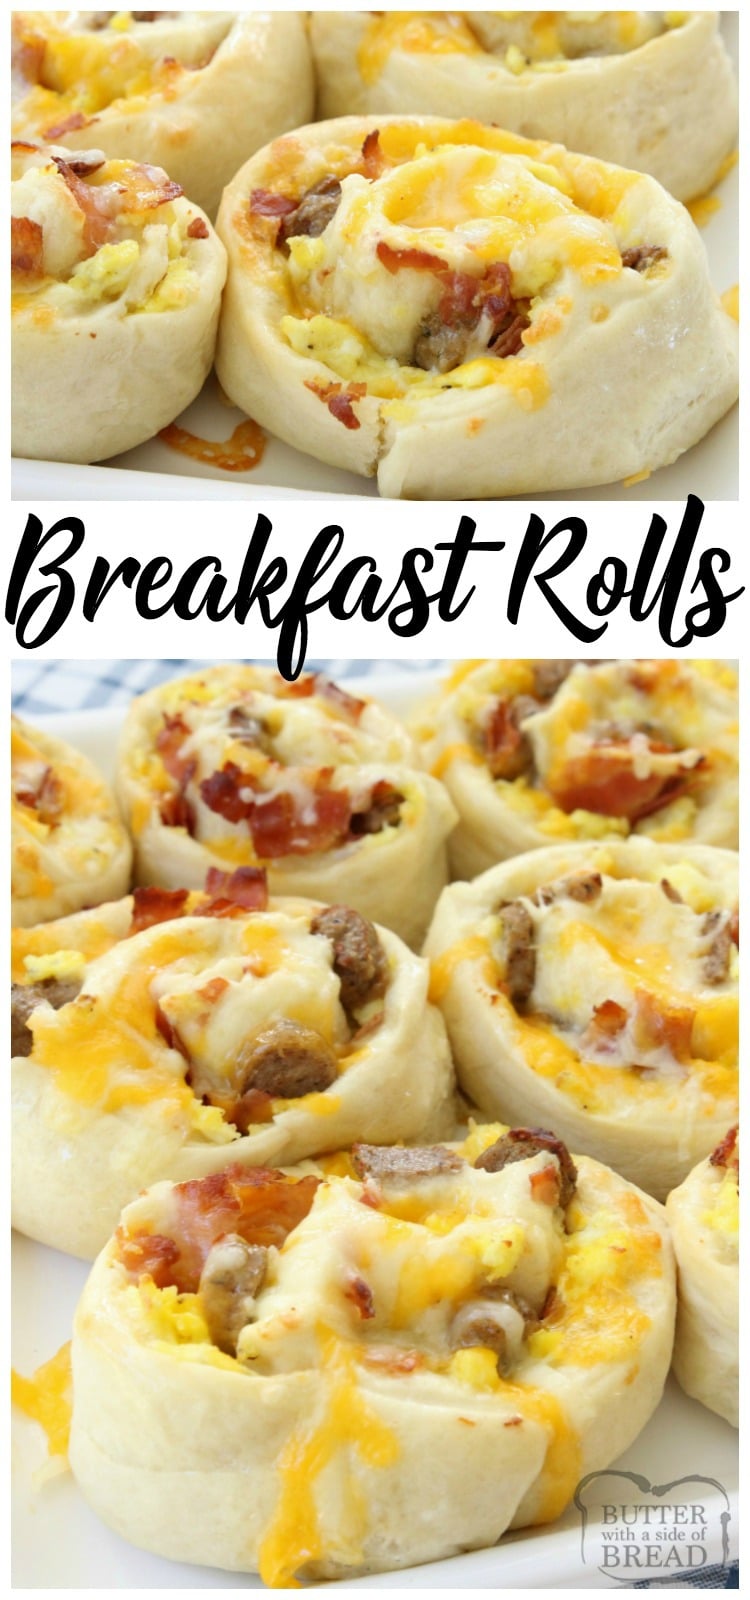 Breakfast Rolls filled with scrambled eggs, bacon, sausage & cheese then rolled in homemade dough and baked to perfection. These rolls are perfect for breakfast, brunch or dinner! Easy #breakfast #recipe from Butter With A Side of Bread